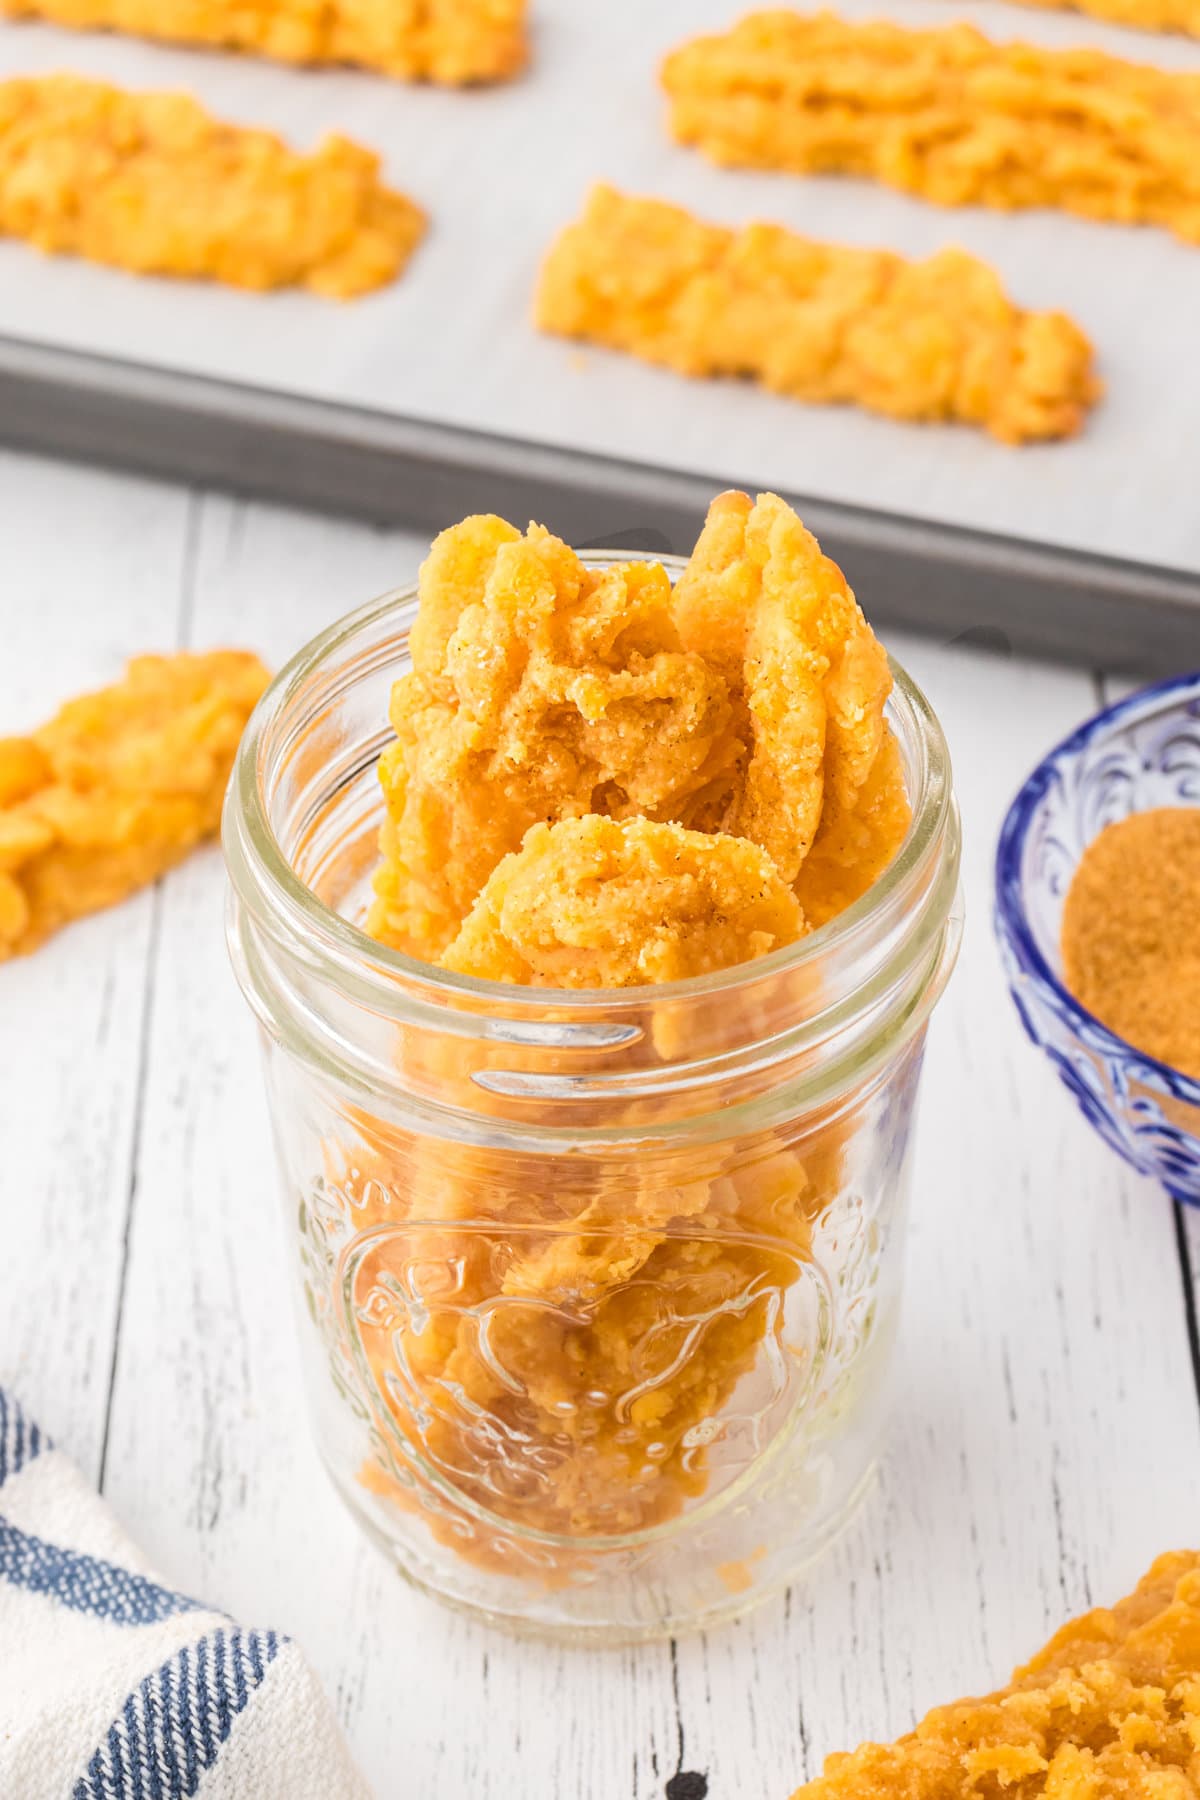 Crispy cheese straws in a glass jar and leftovers on a baking sheet in the background.